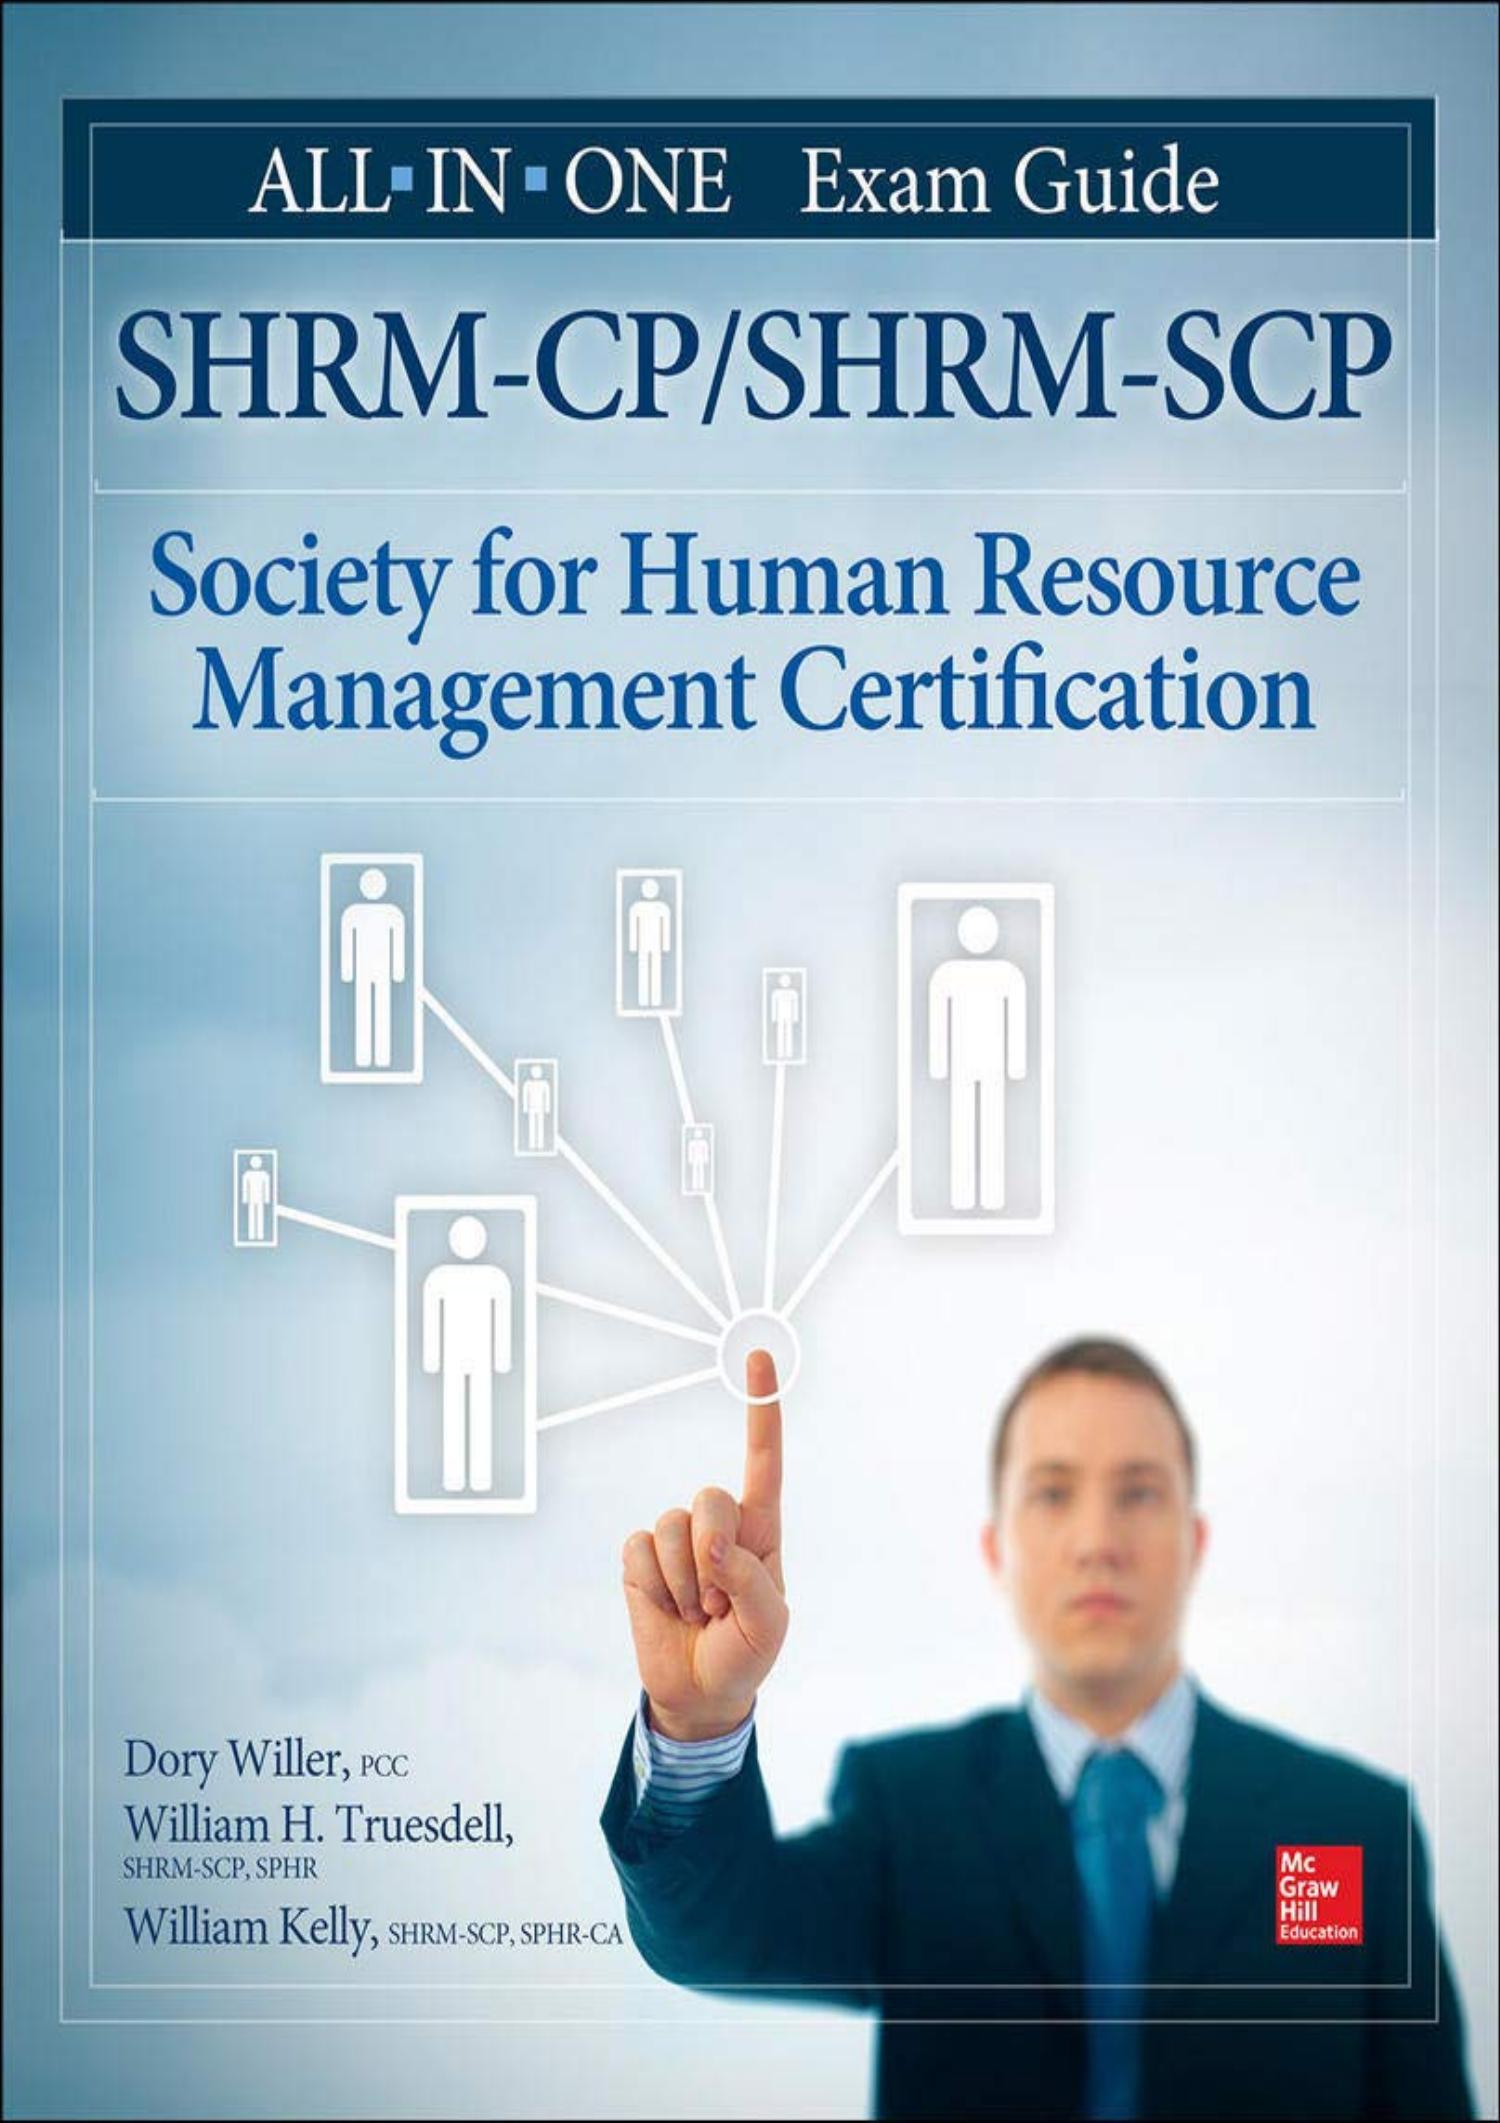 SHRM CP SHRM SCP Certification All in One Exam Guide.pdf DocDroid